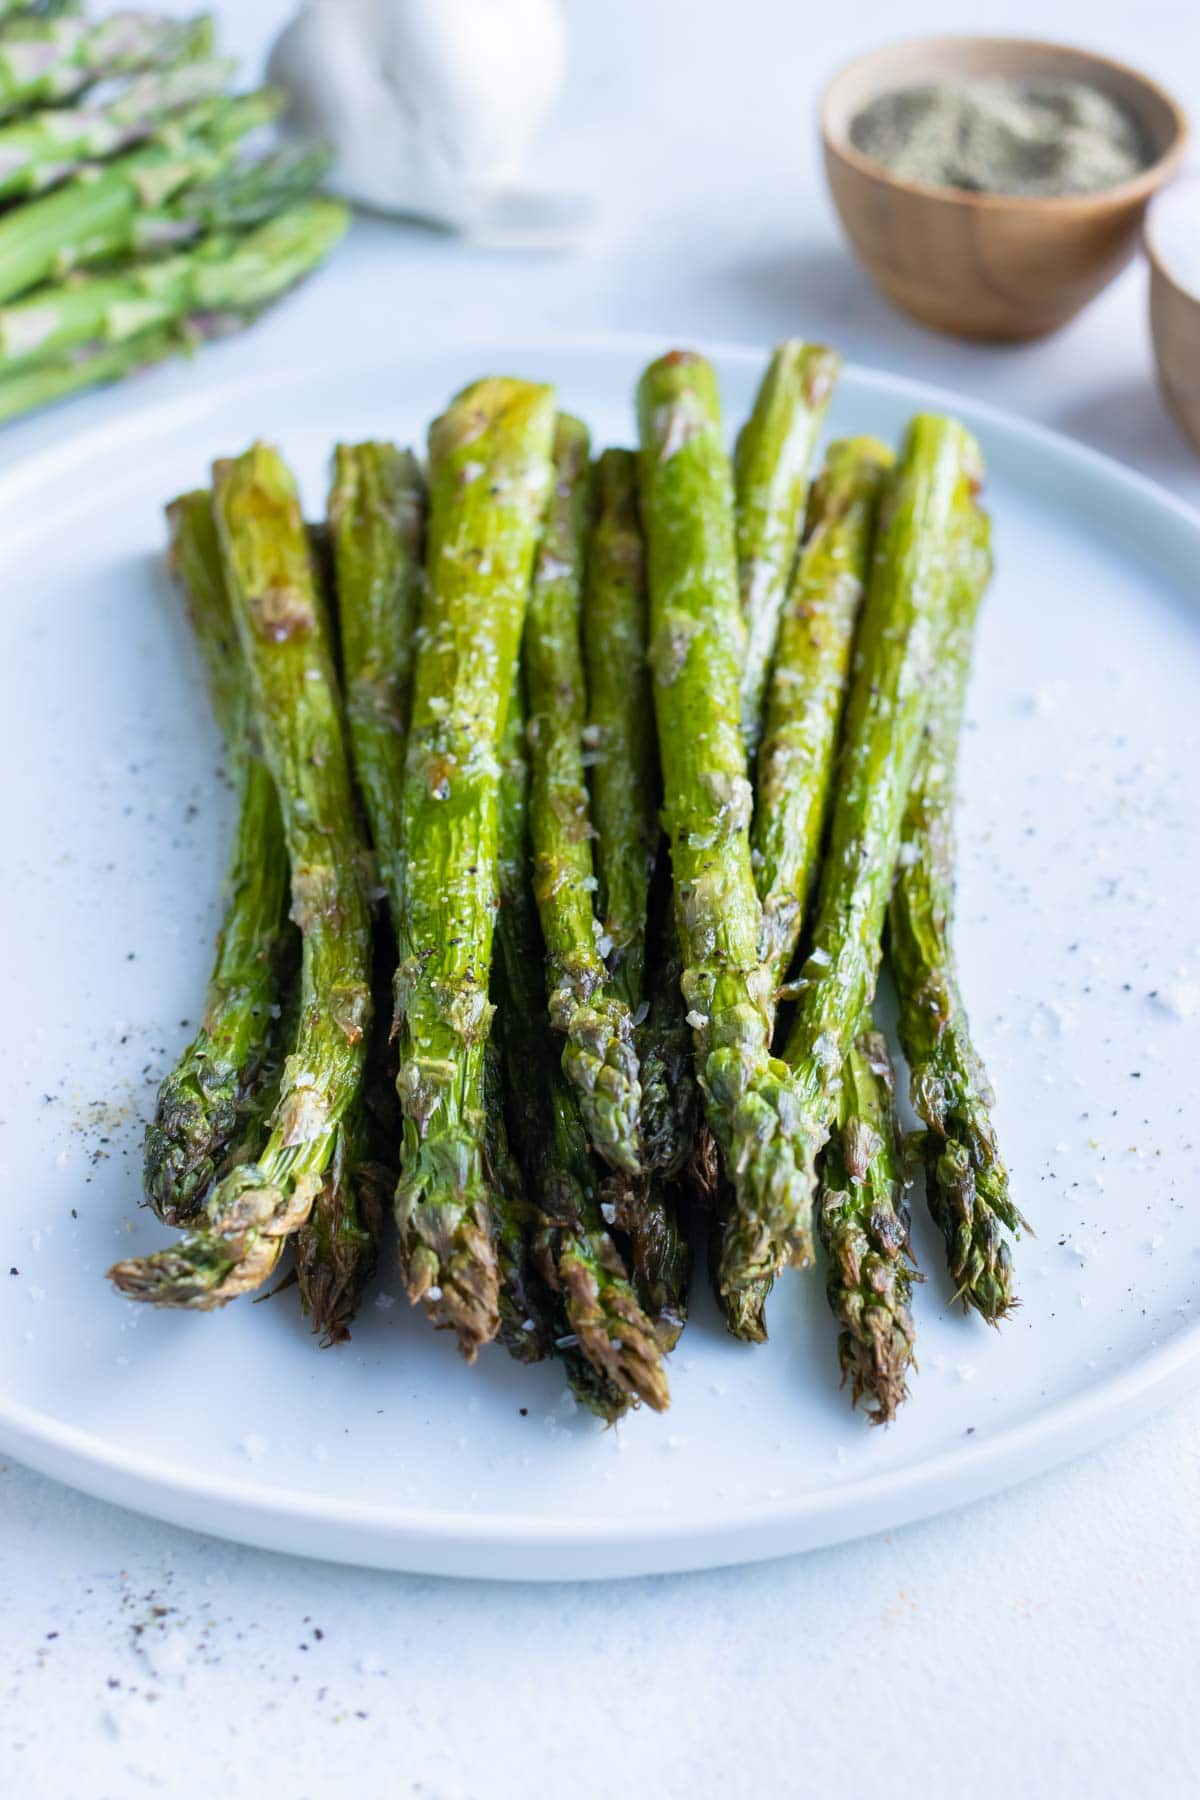 Low-carb air fryer asparagus is dished on a white plate.